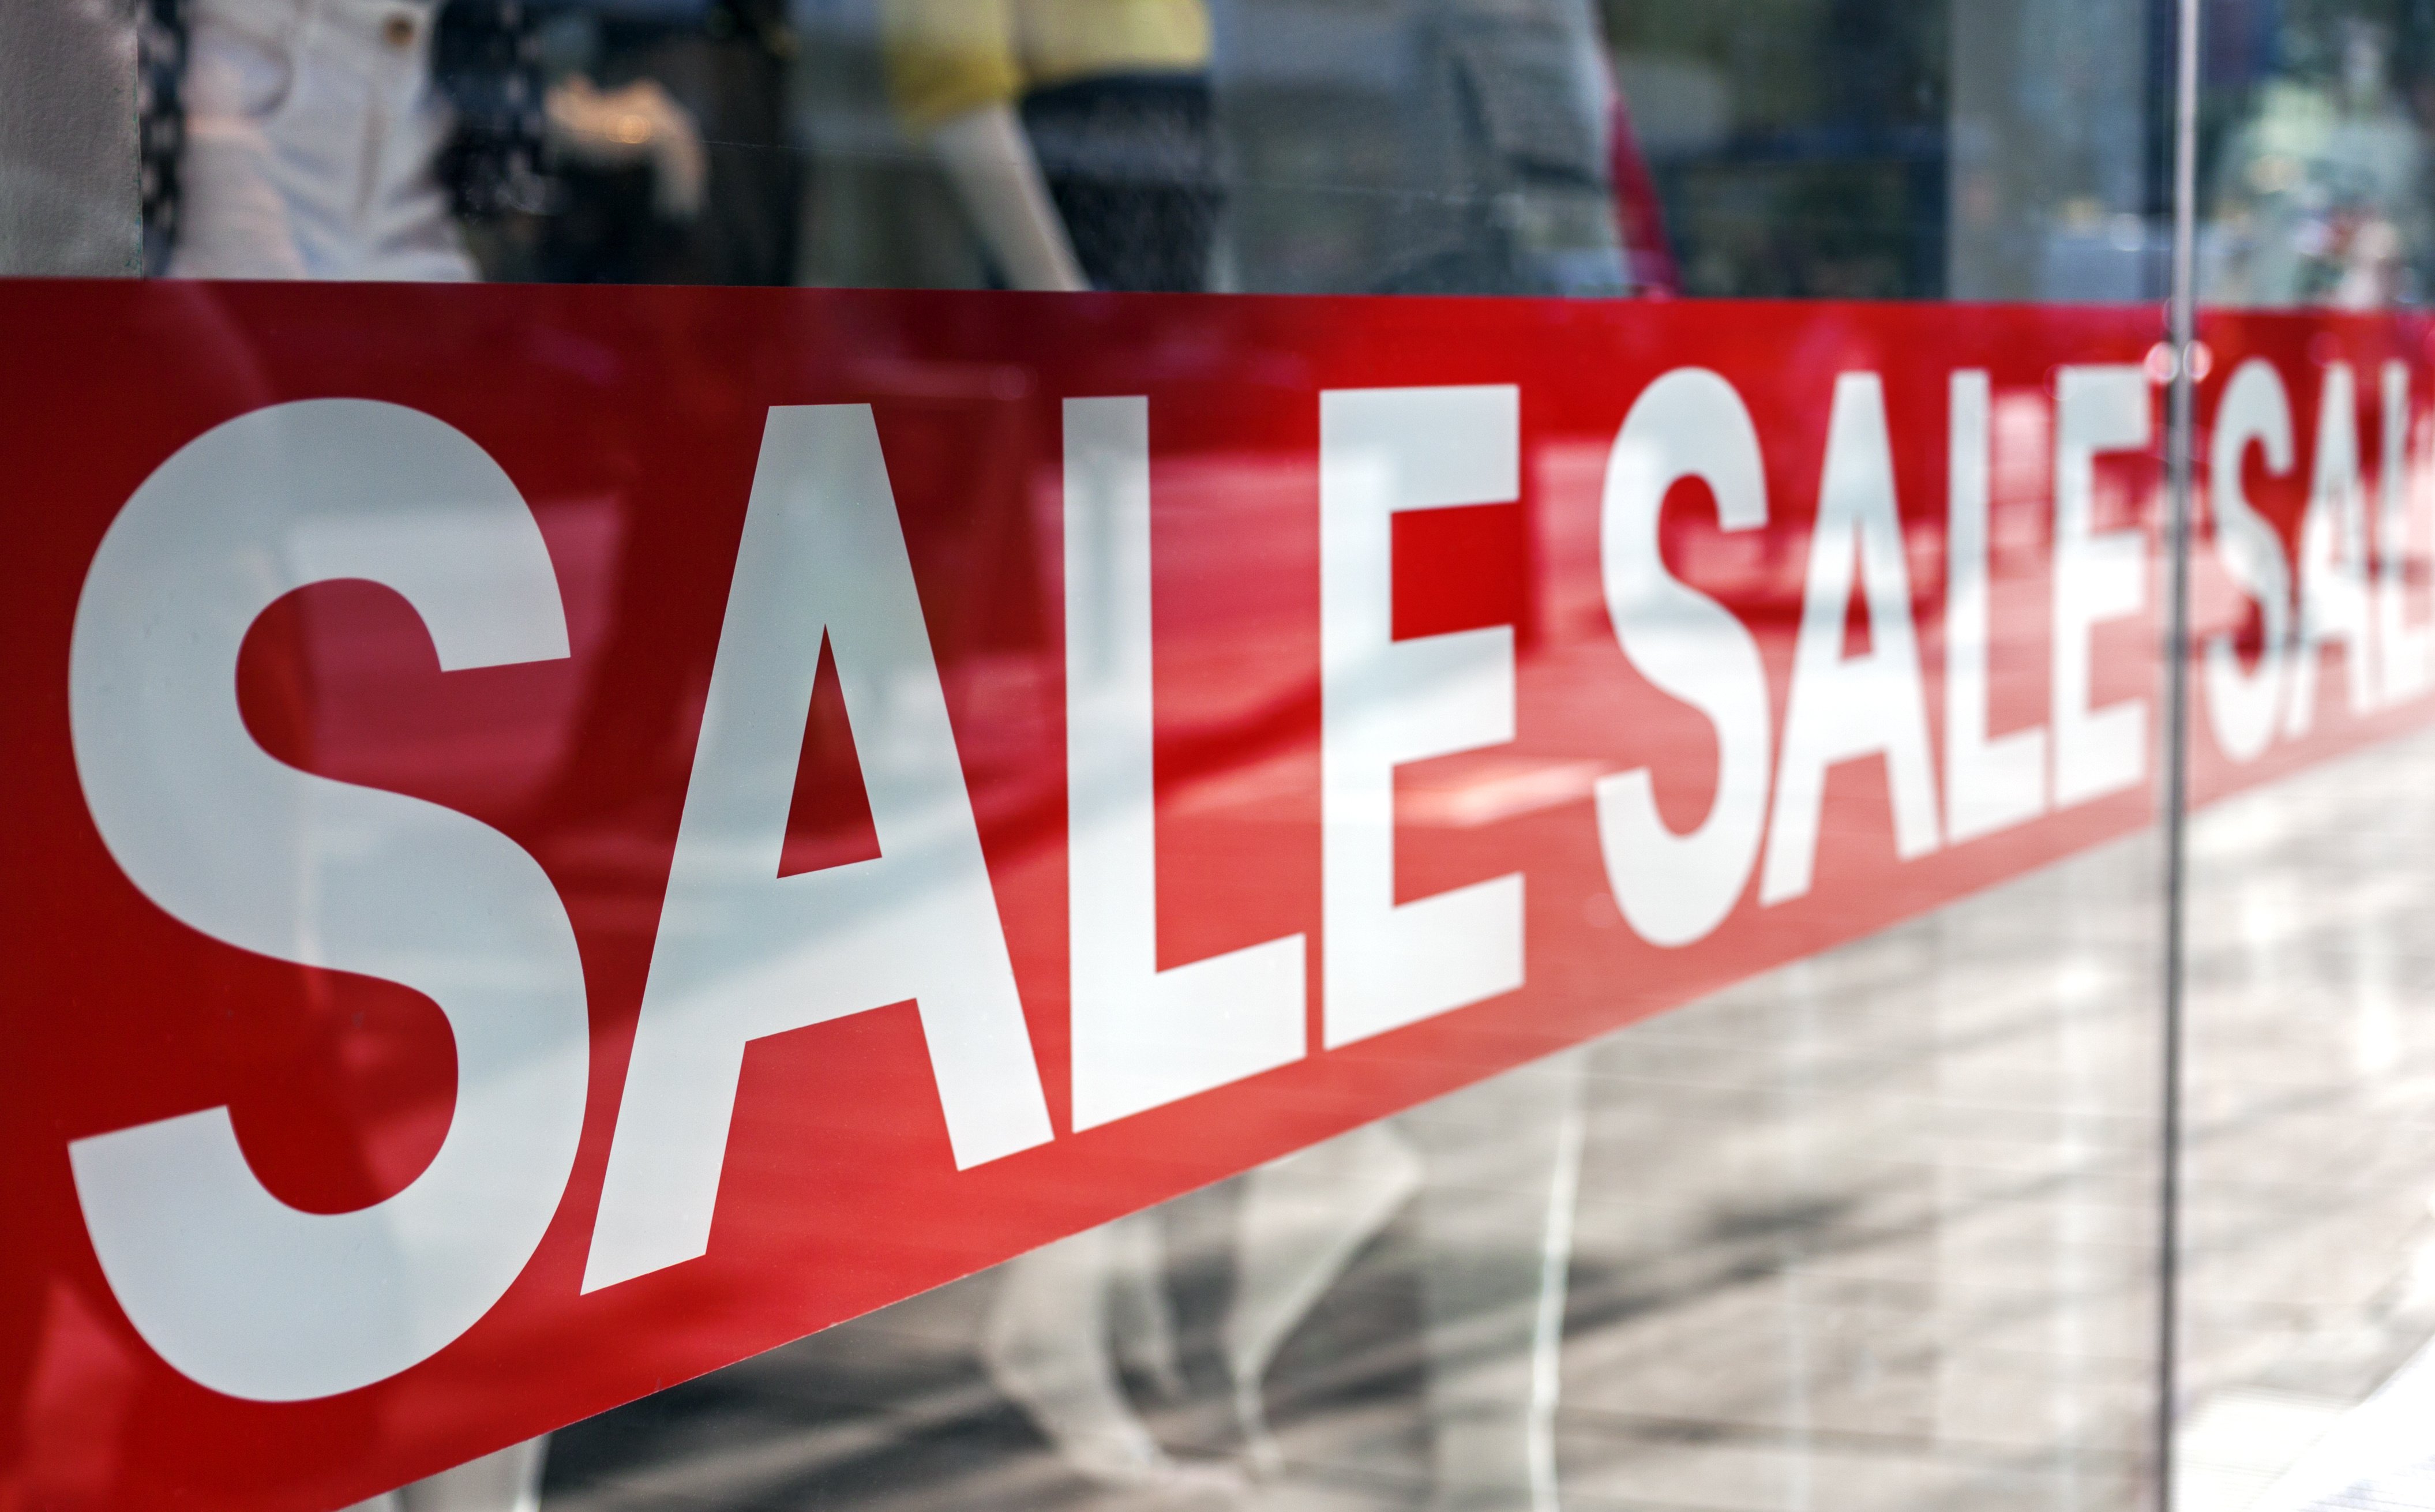 Picture of shop window display with text Sale on red poster